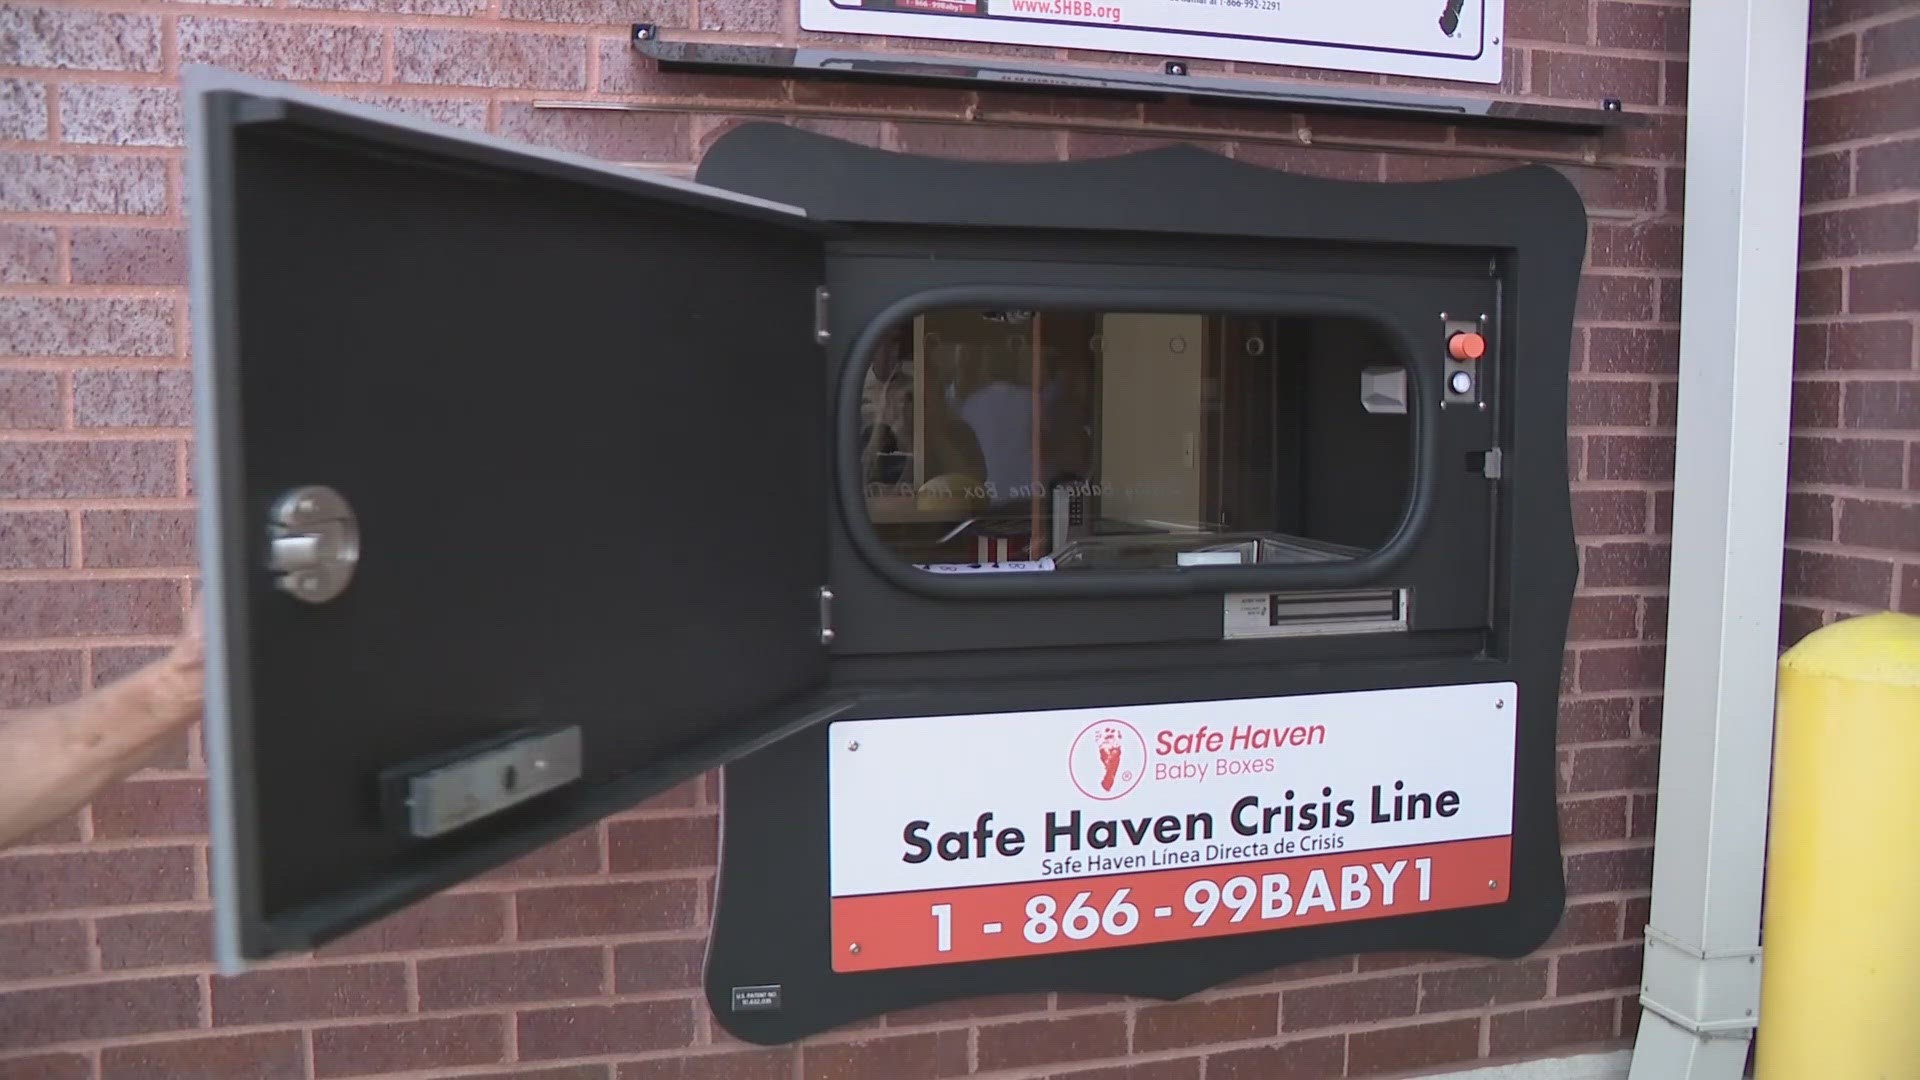 Safe Haven Baby Box program said there are 152 active baby boxes in the United States. To date, there are 32 babies have been safely surrendered in those boxes.